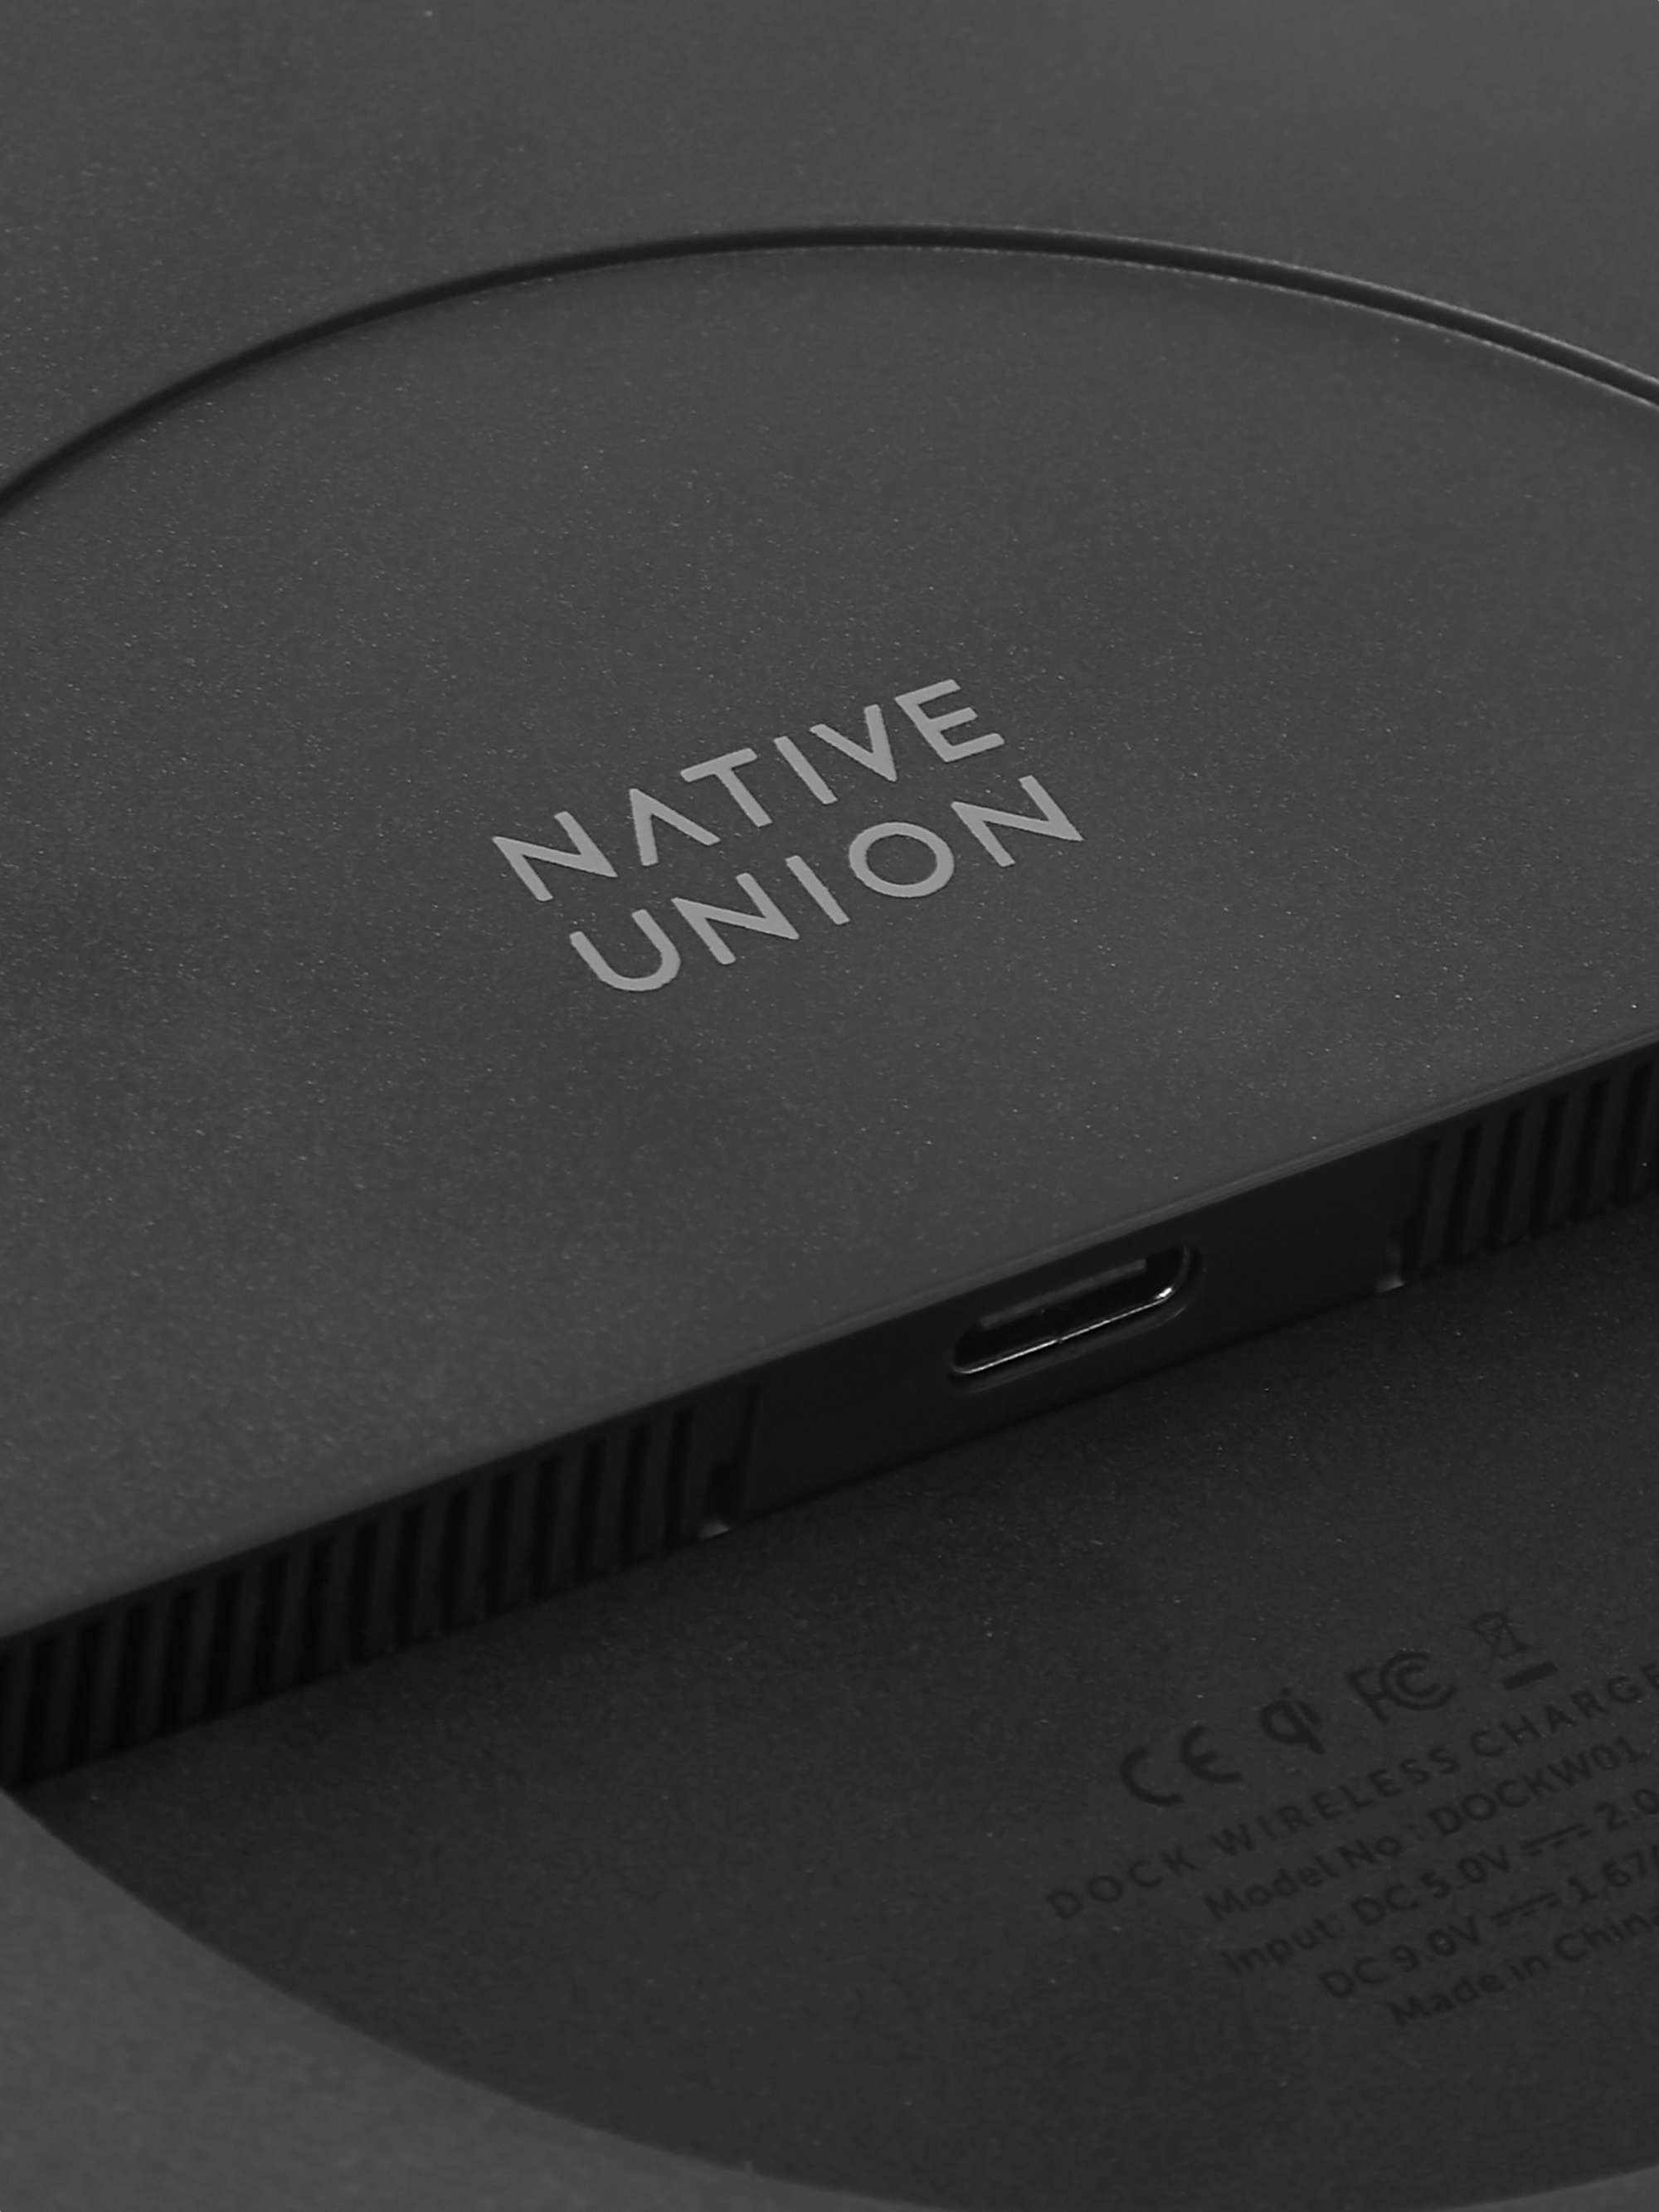 NATIVE UNION Dock Wireless Charger